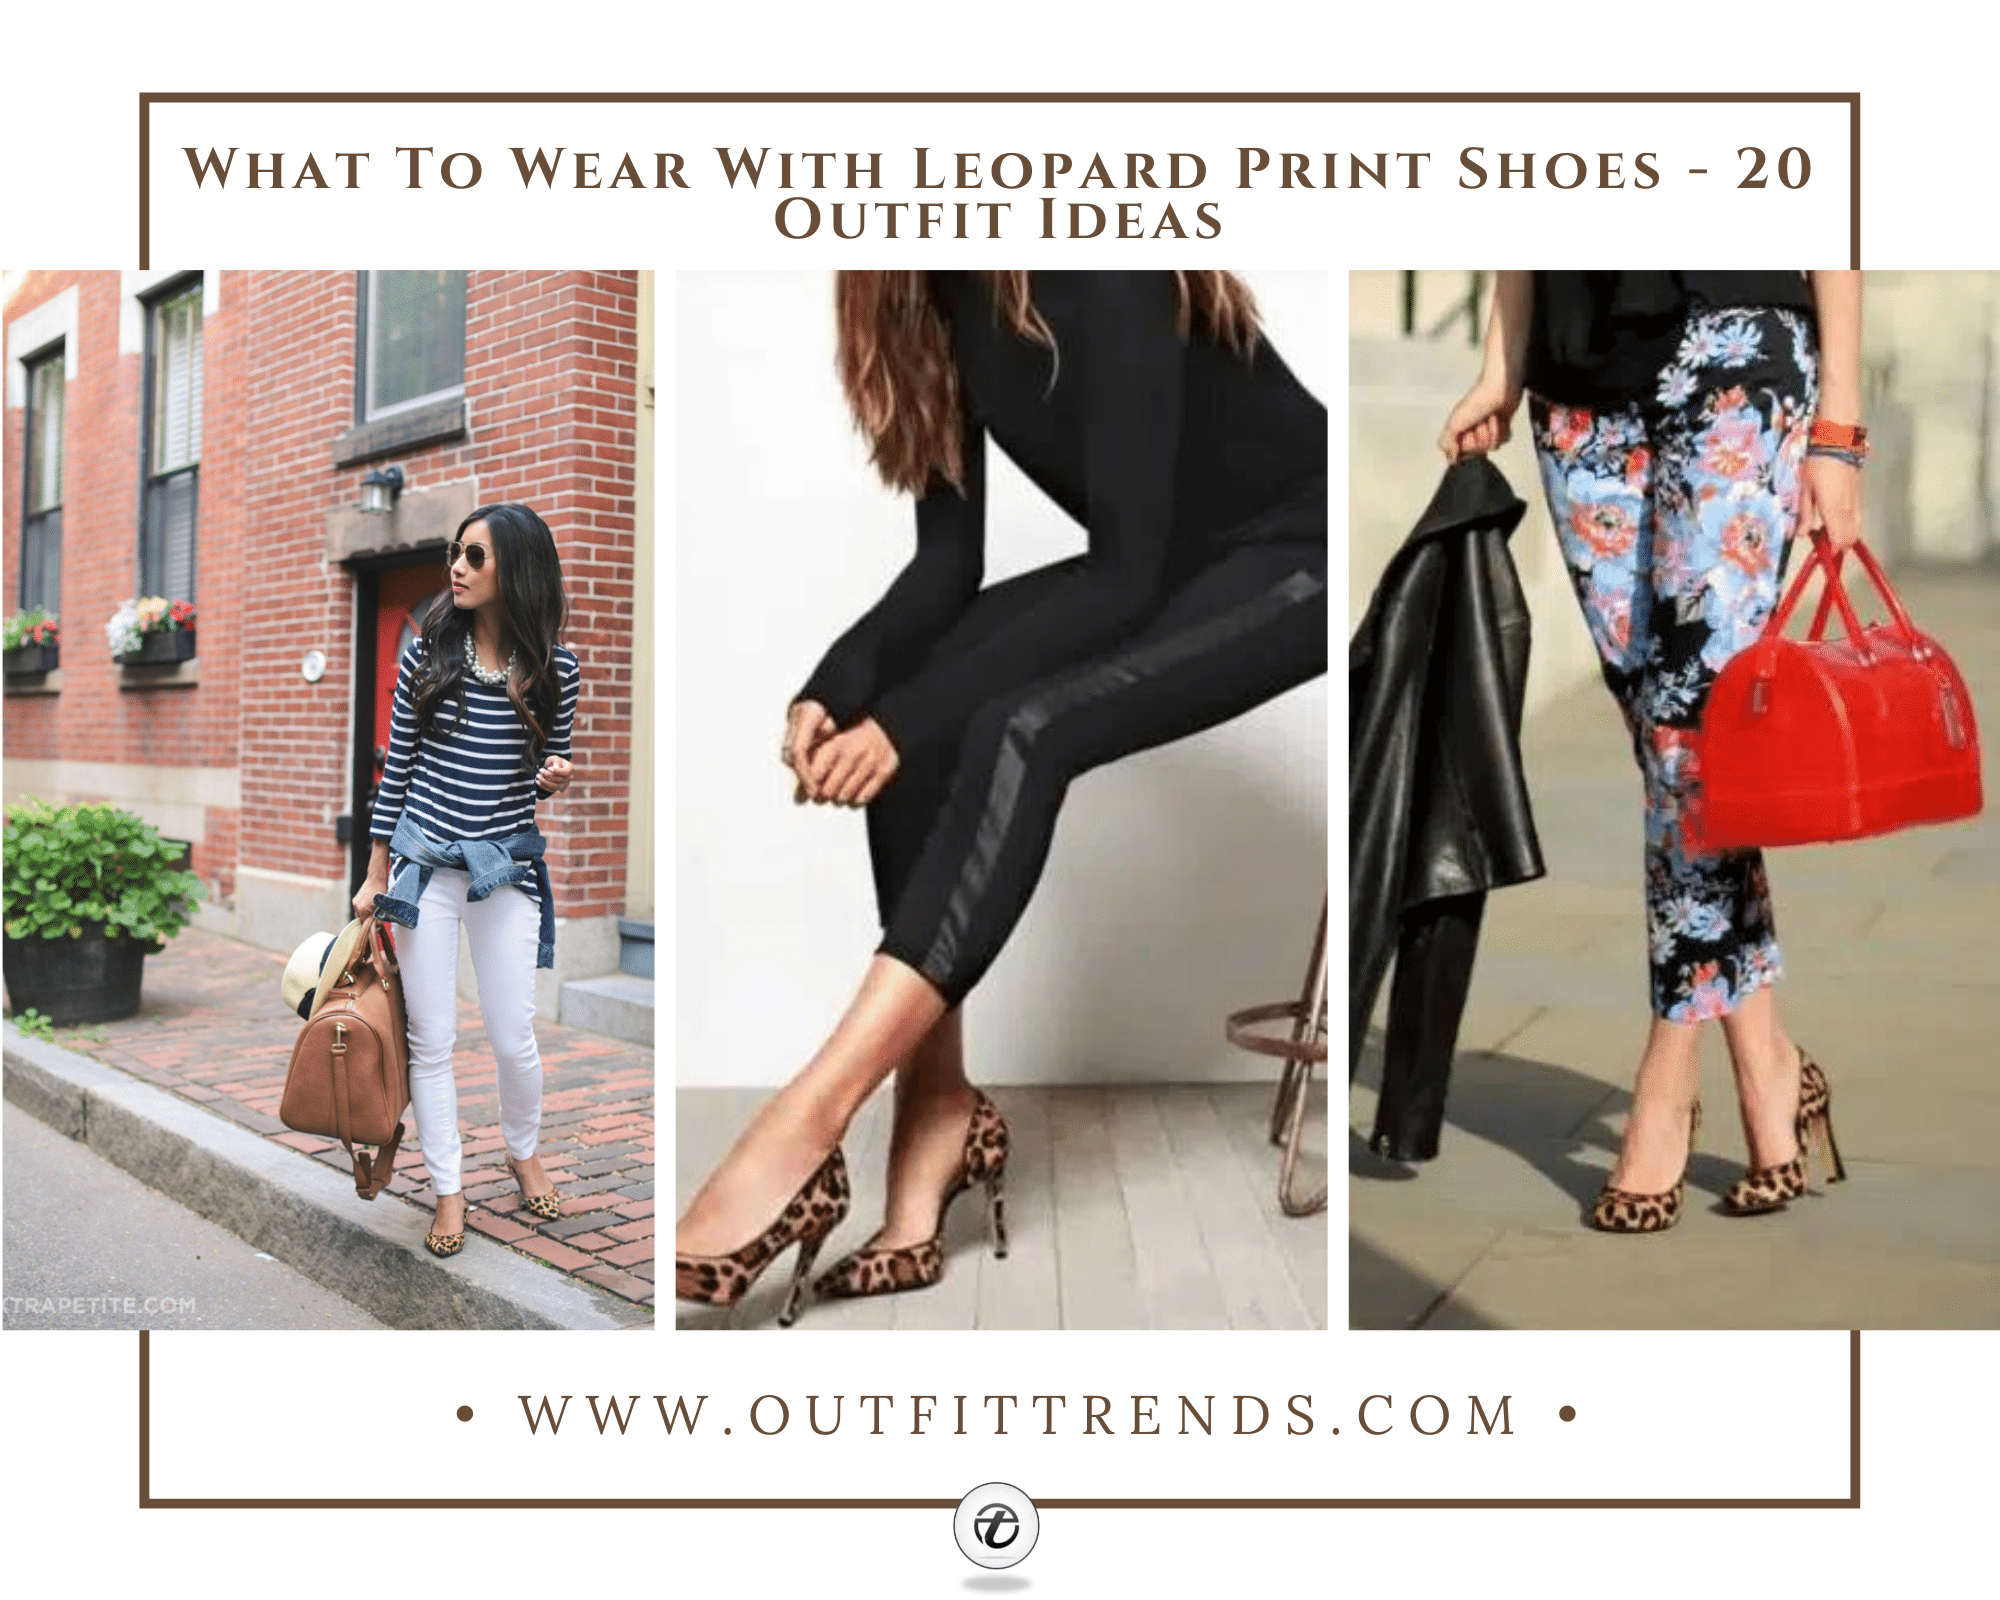 What To Wear With Leopard Print Shoes 20 Outfit Ideas